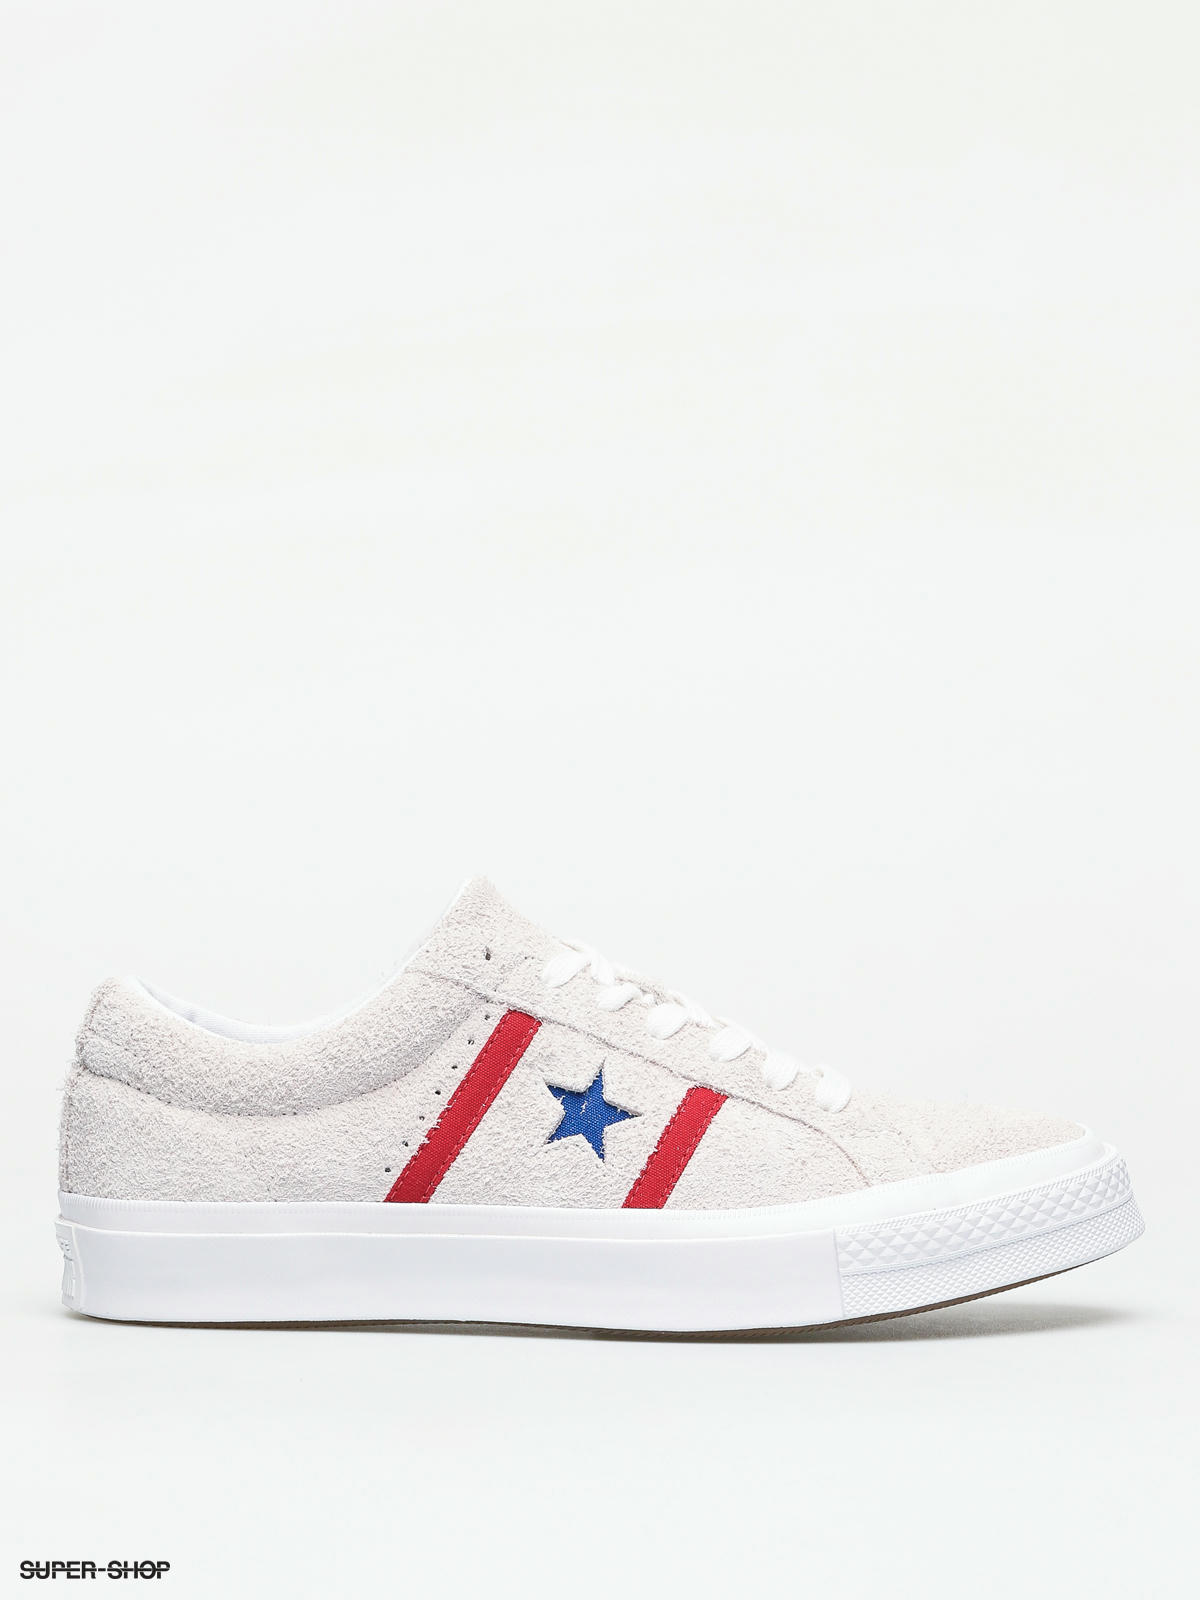 Converse One Star Academy Ox Shoes 